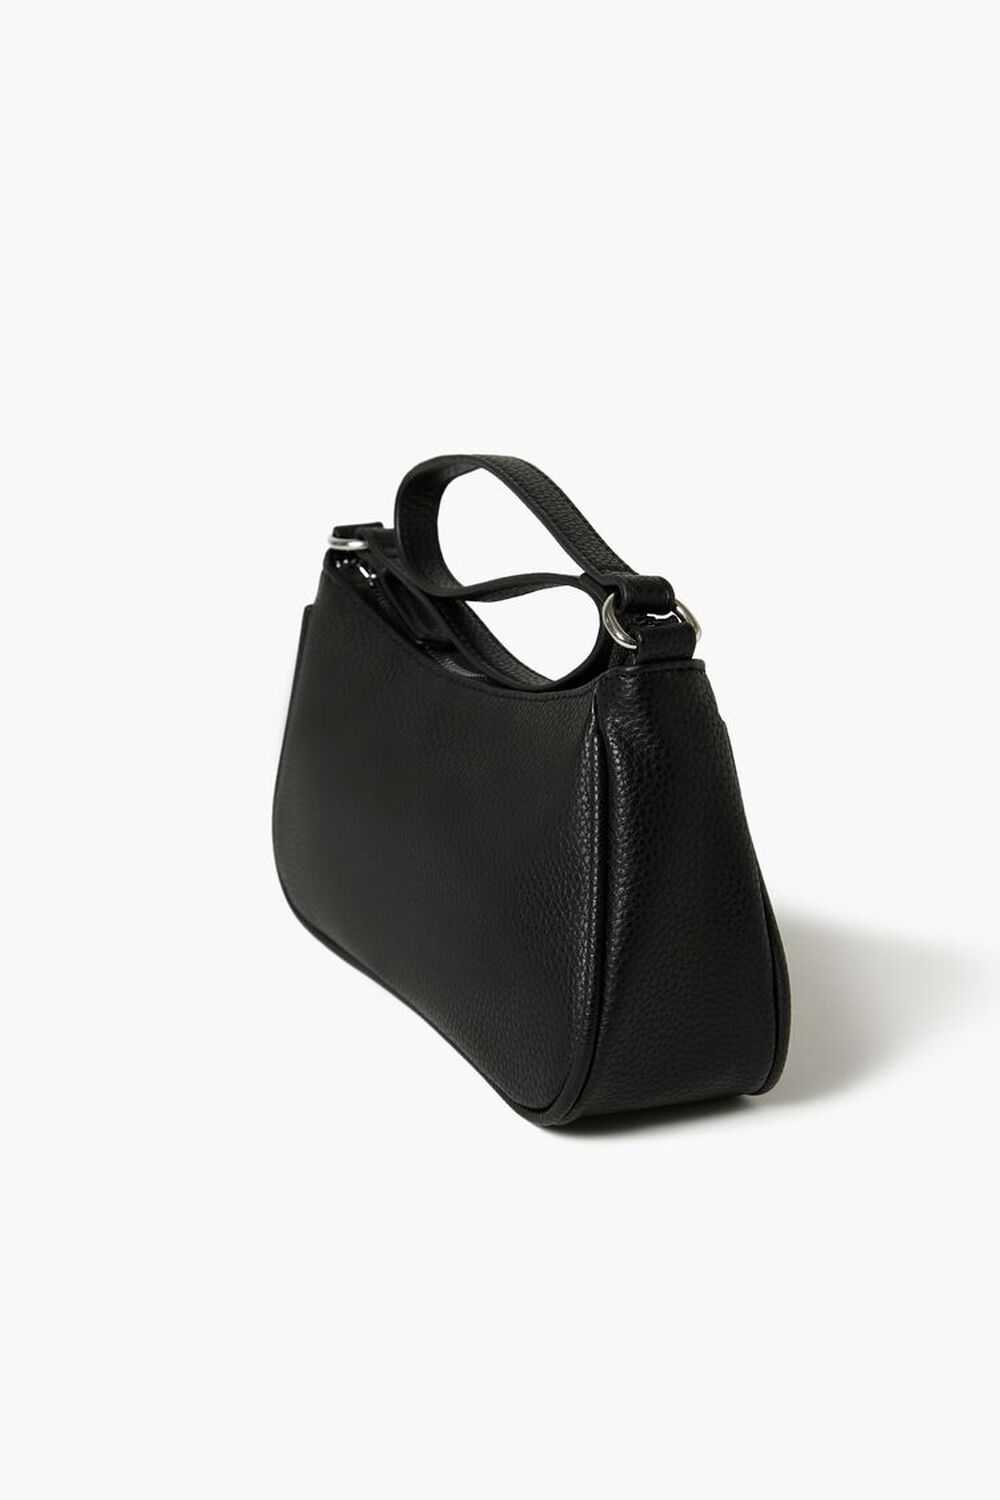 Shop Faux Leather Bucket Bag for Women from latest collection at Forever 21